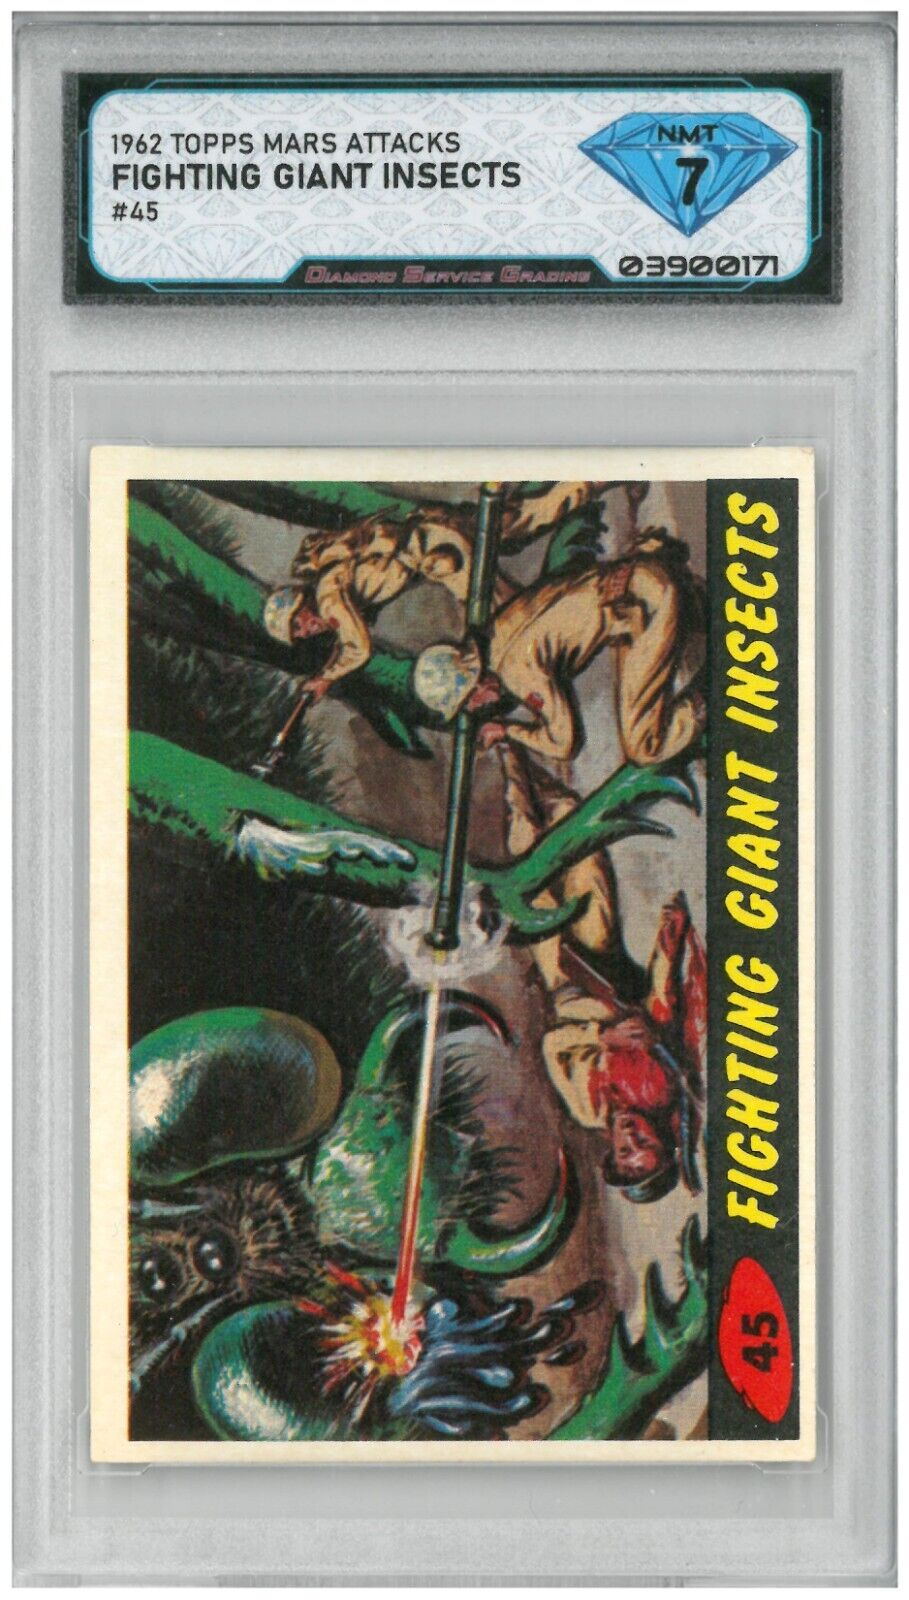 1962 Topps Mars Attacks FIGHTING GIANT INSECTS #45 💎 DSG 7 NM